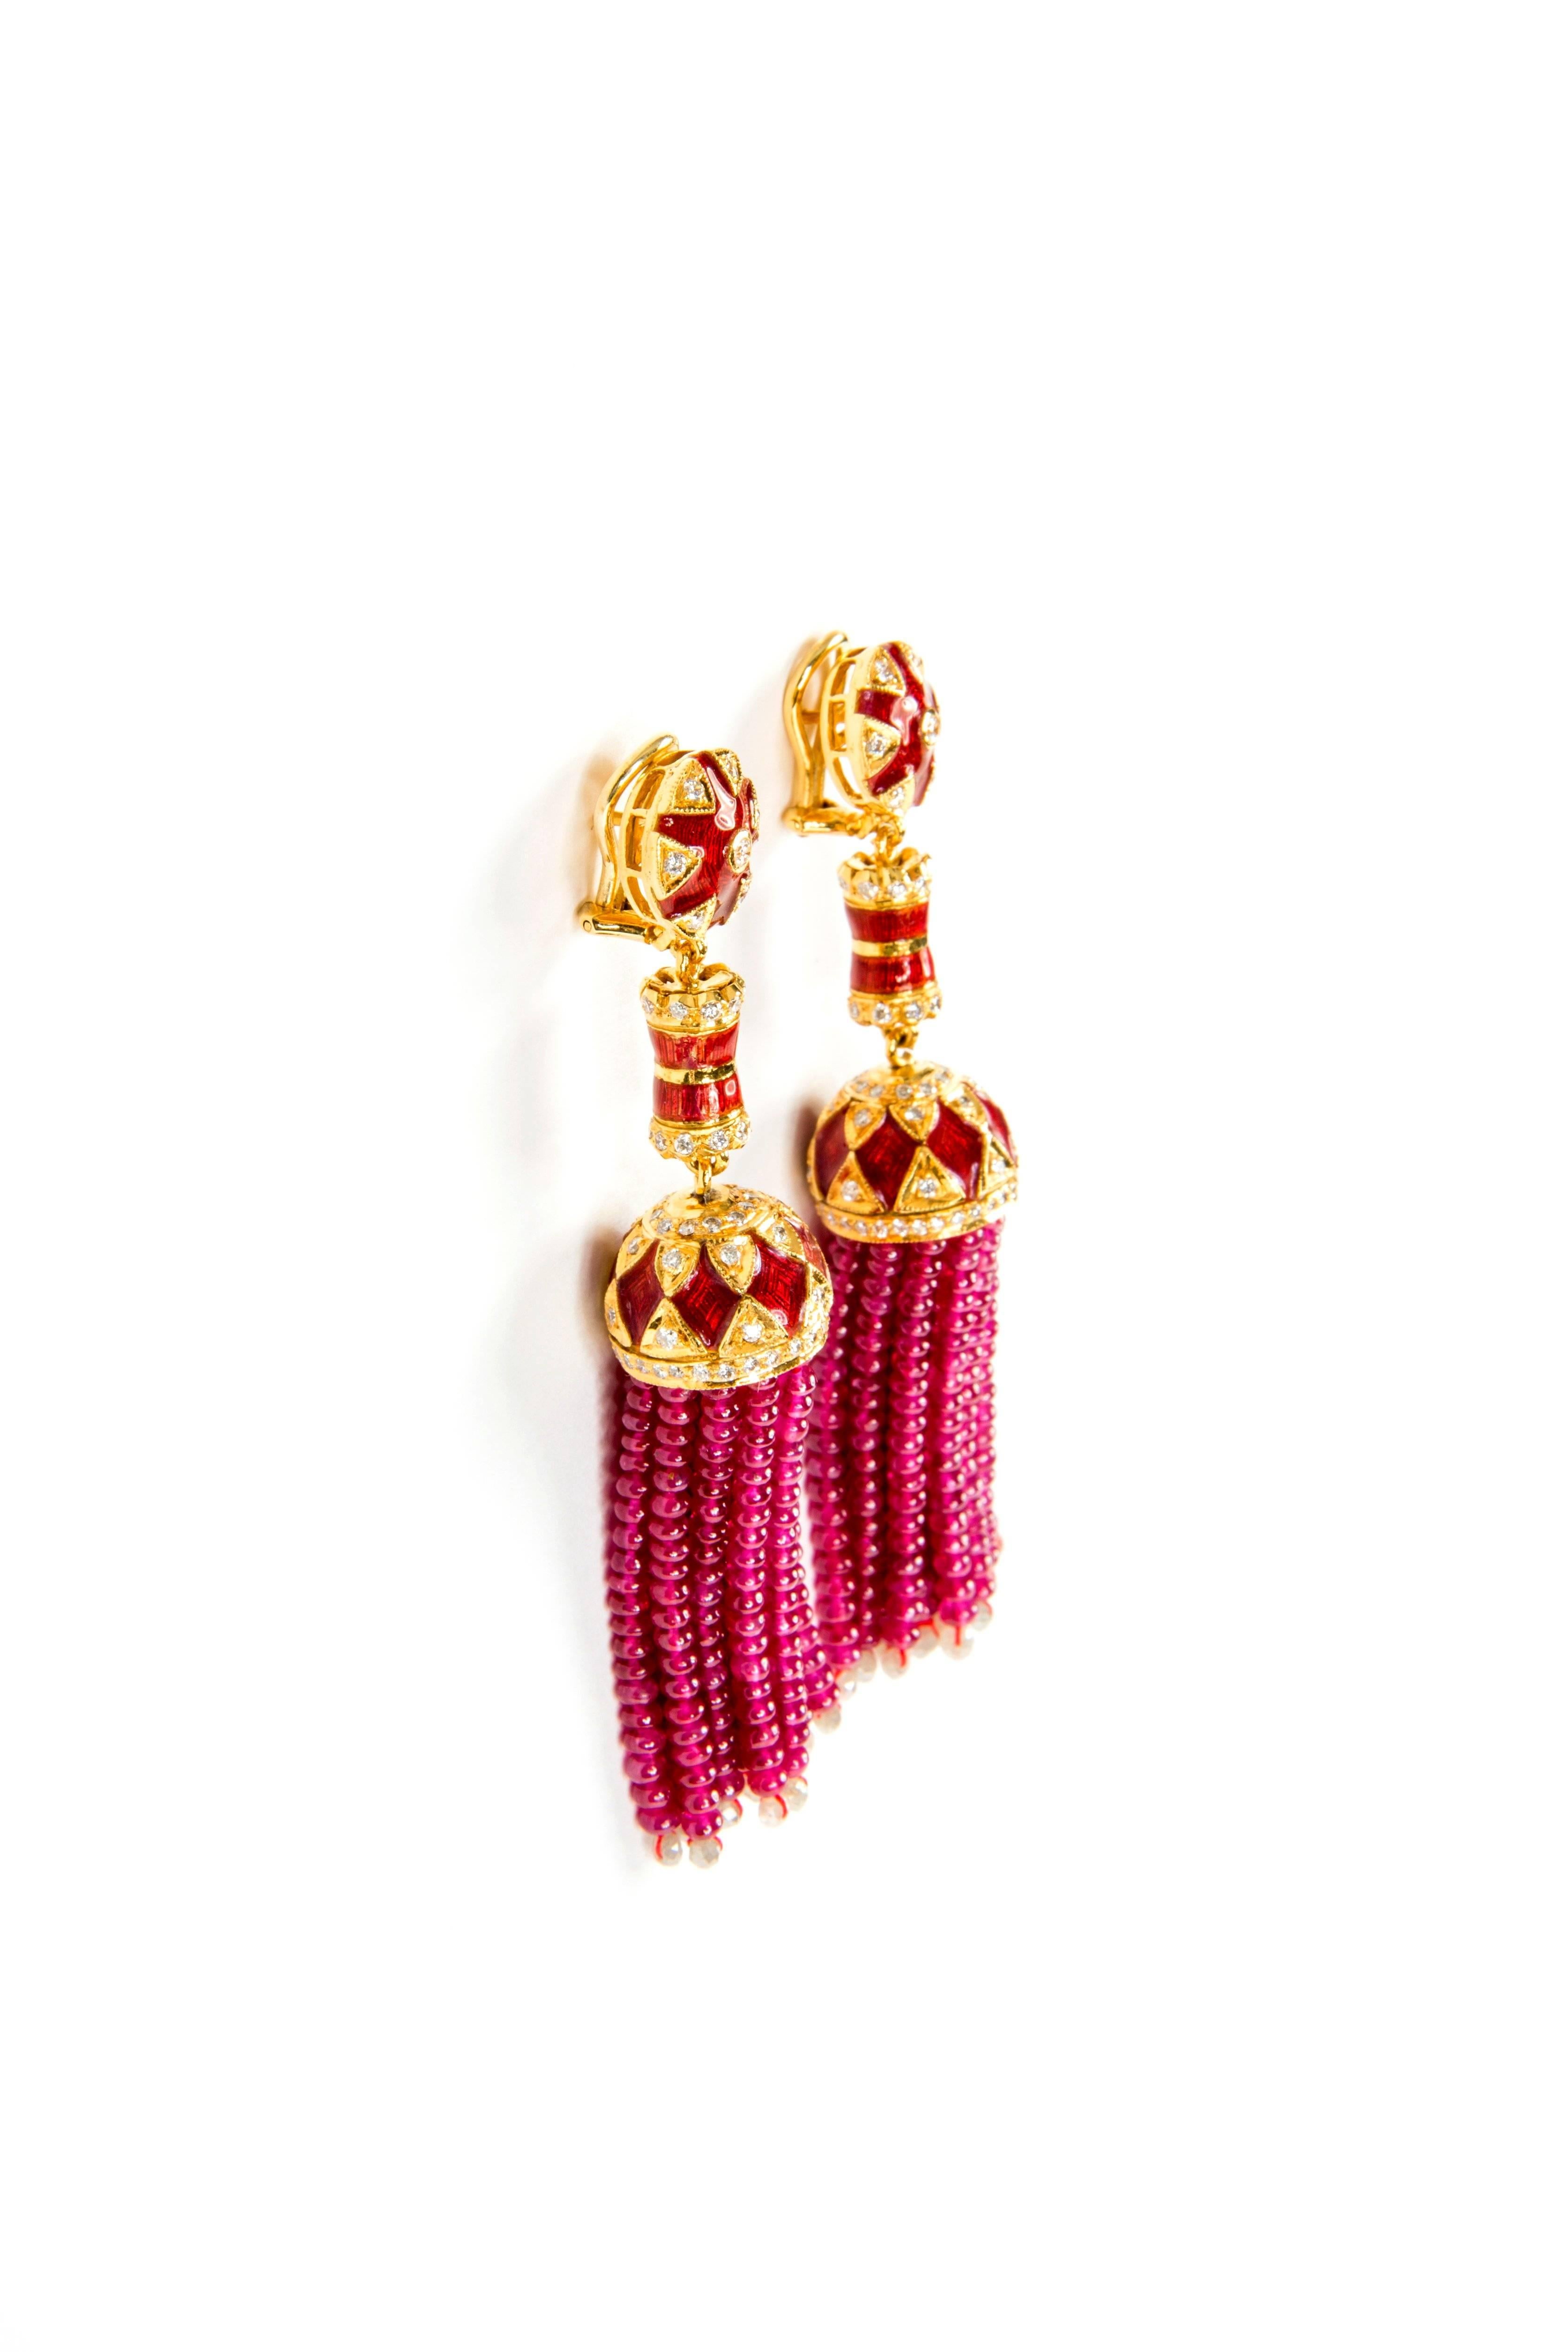 Ruby and Diamond Tassel Earrings
154 diamonds ca 1 ct
30 strings with ruby beads ca 80ct
18 karat yellow gold
come with clips and studs. either can be removed free of charge